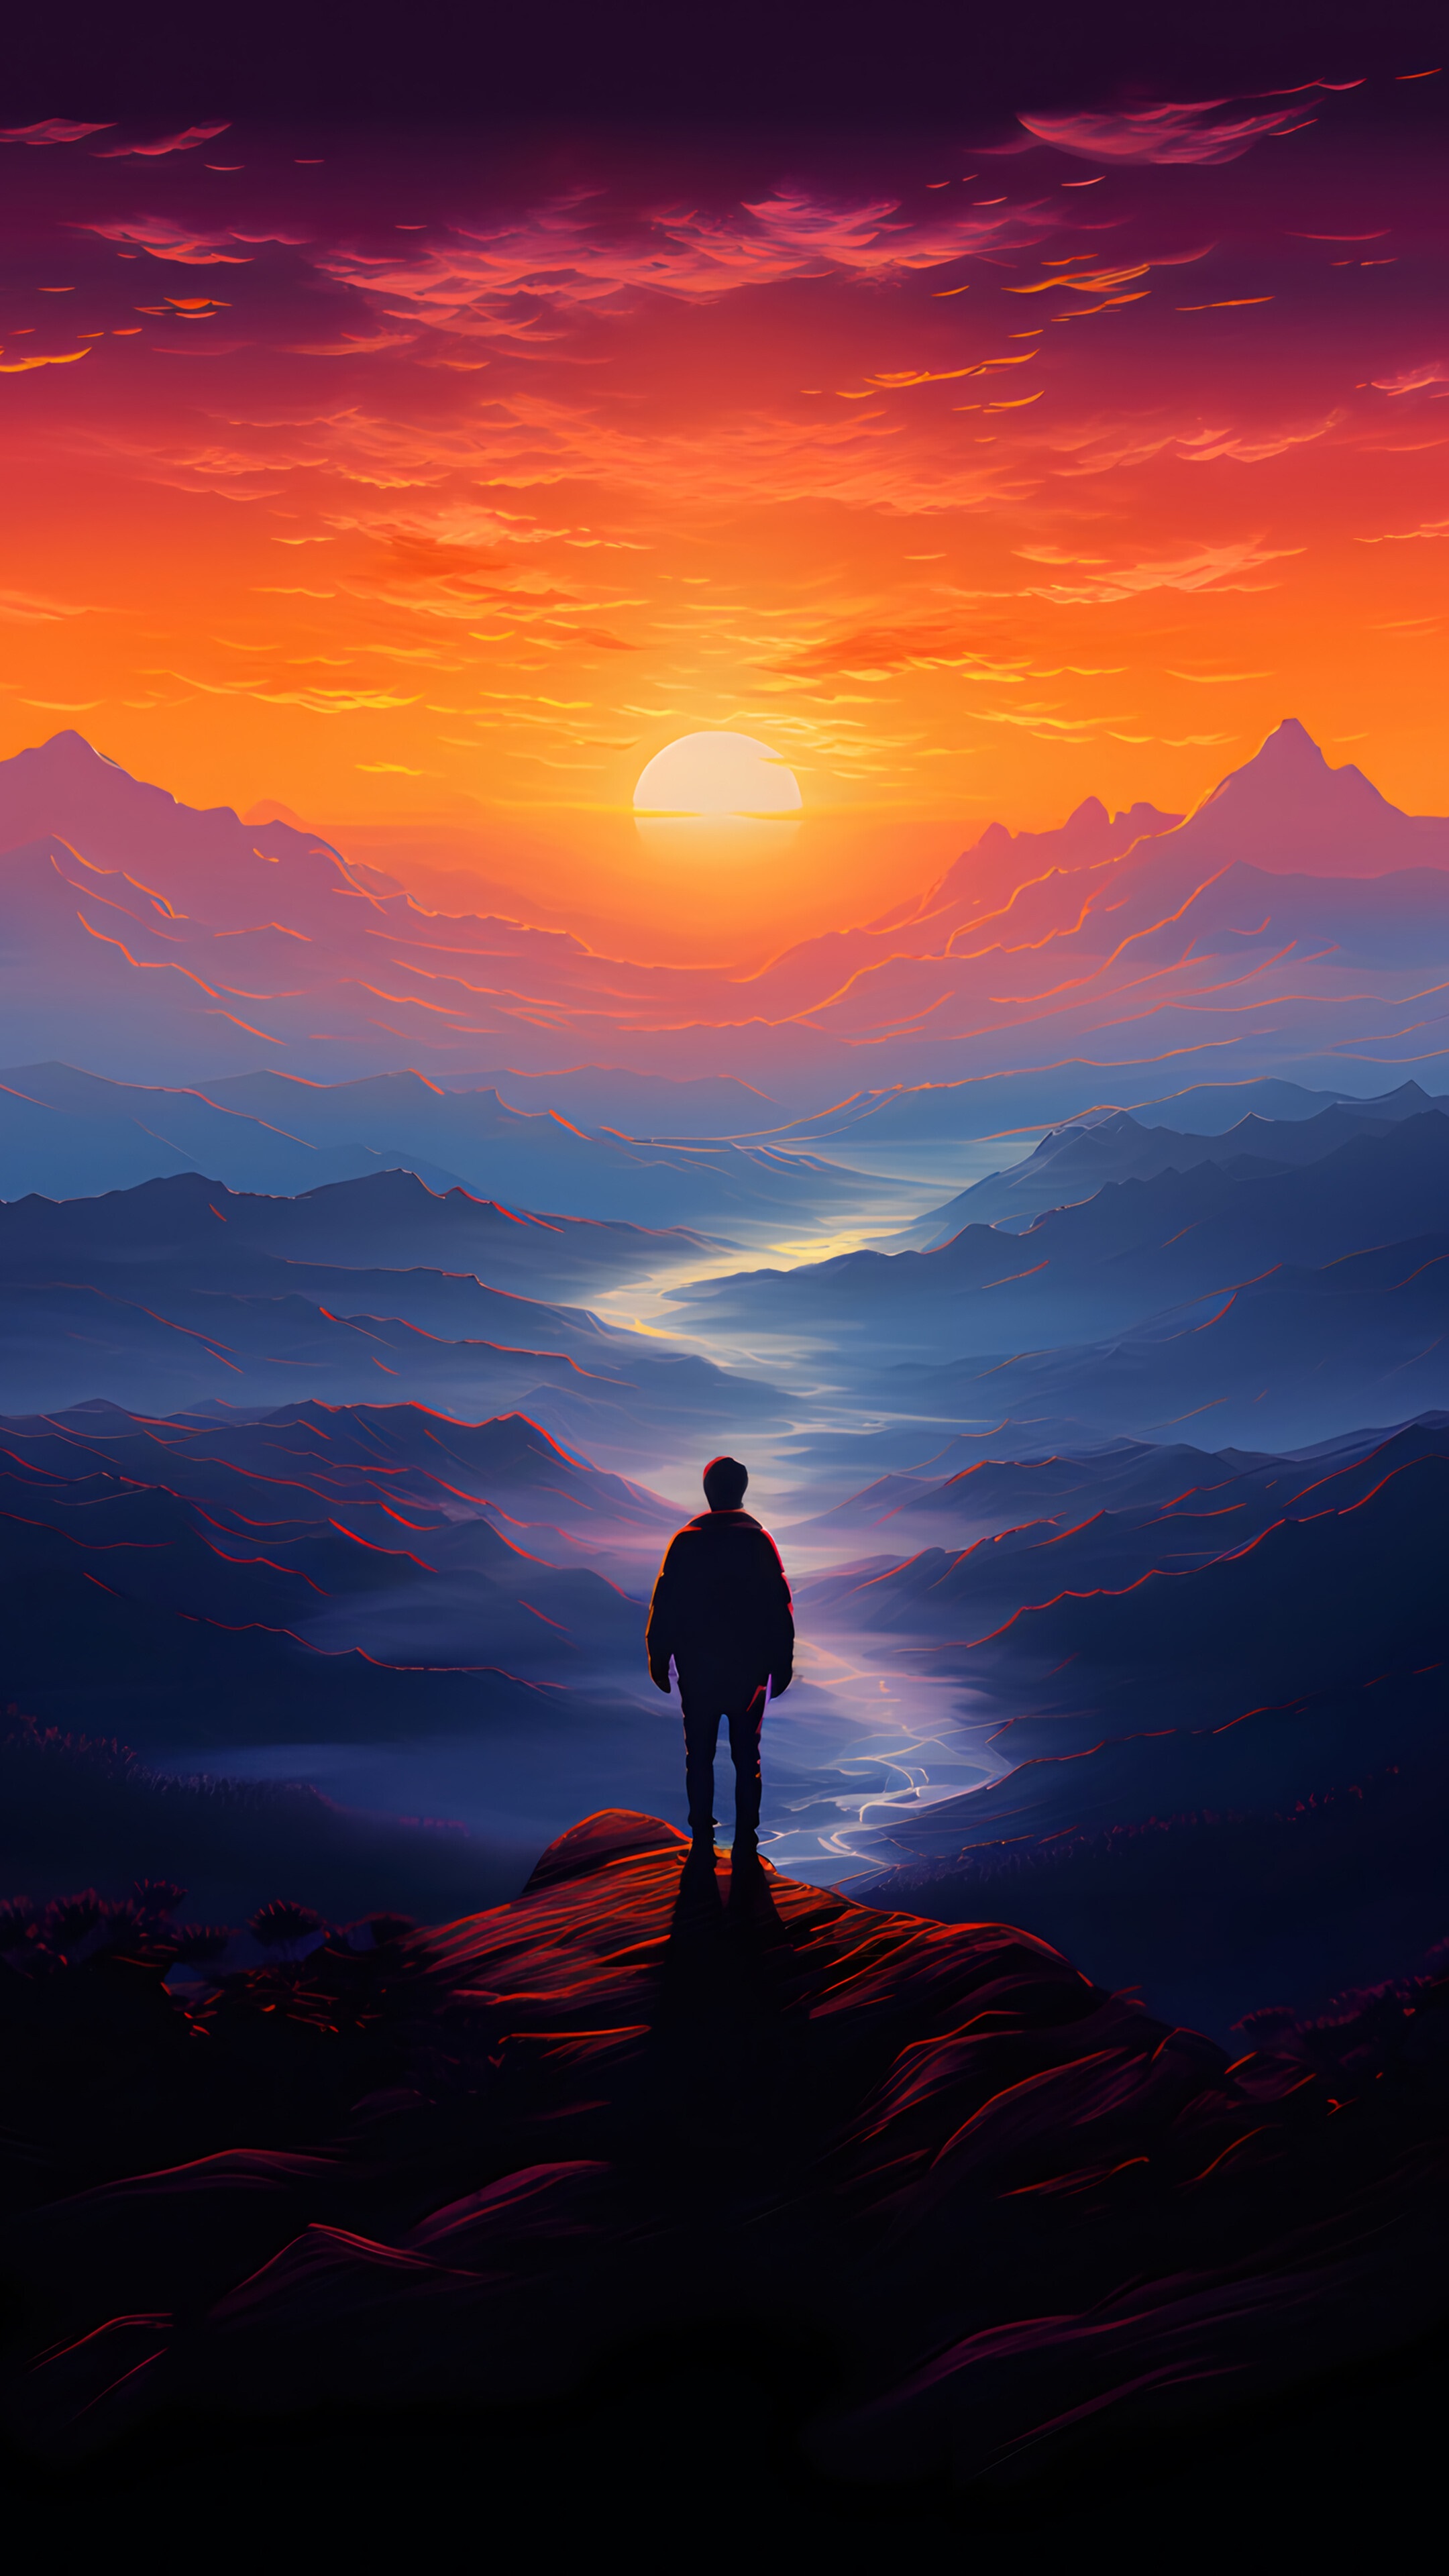 Sunset Horizon Standing Alone Mountains Scenery 4K Android Mobile Phone